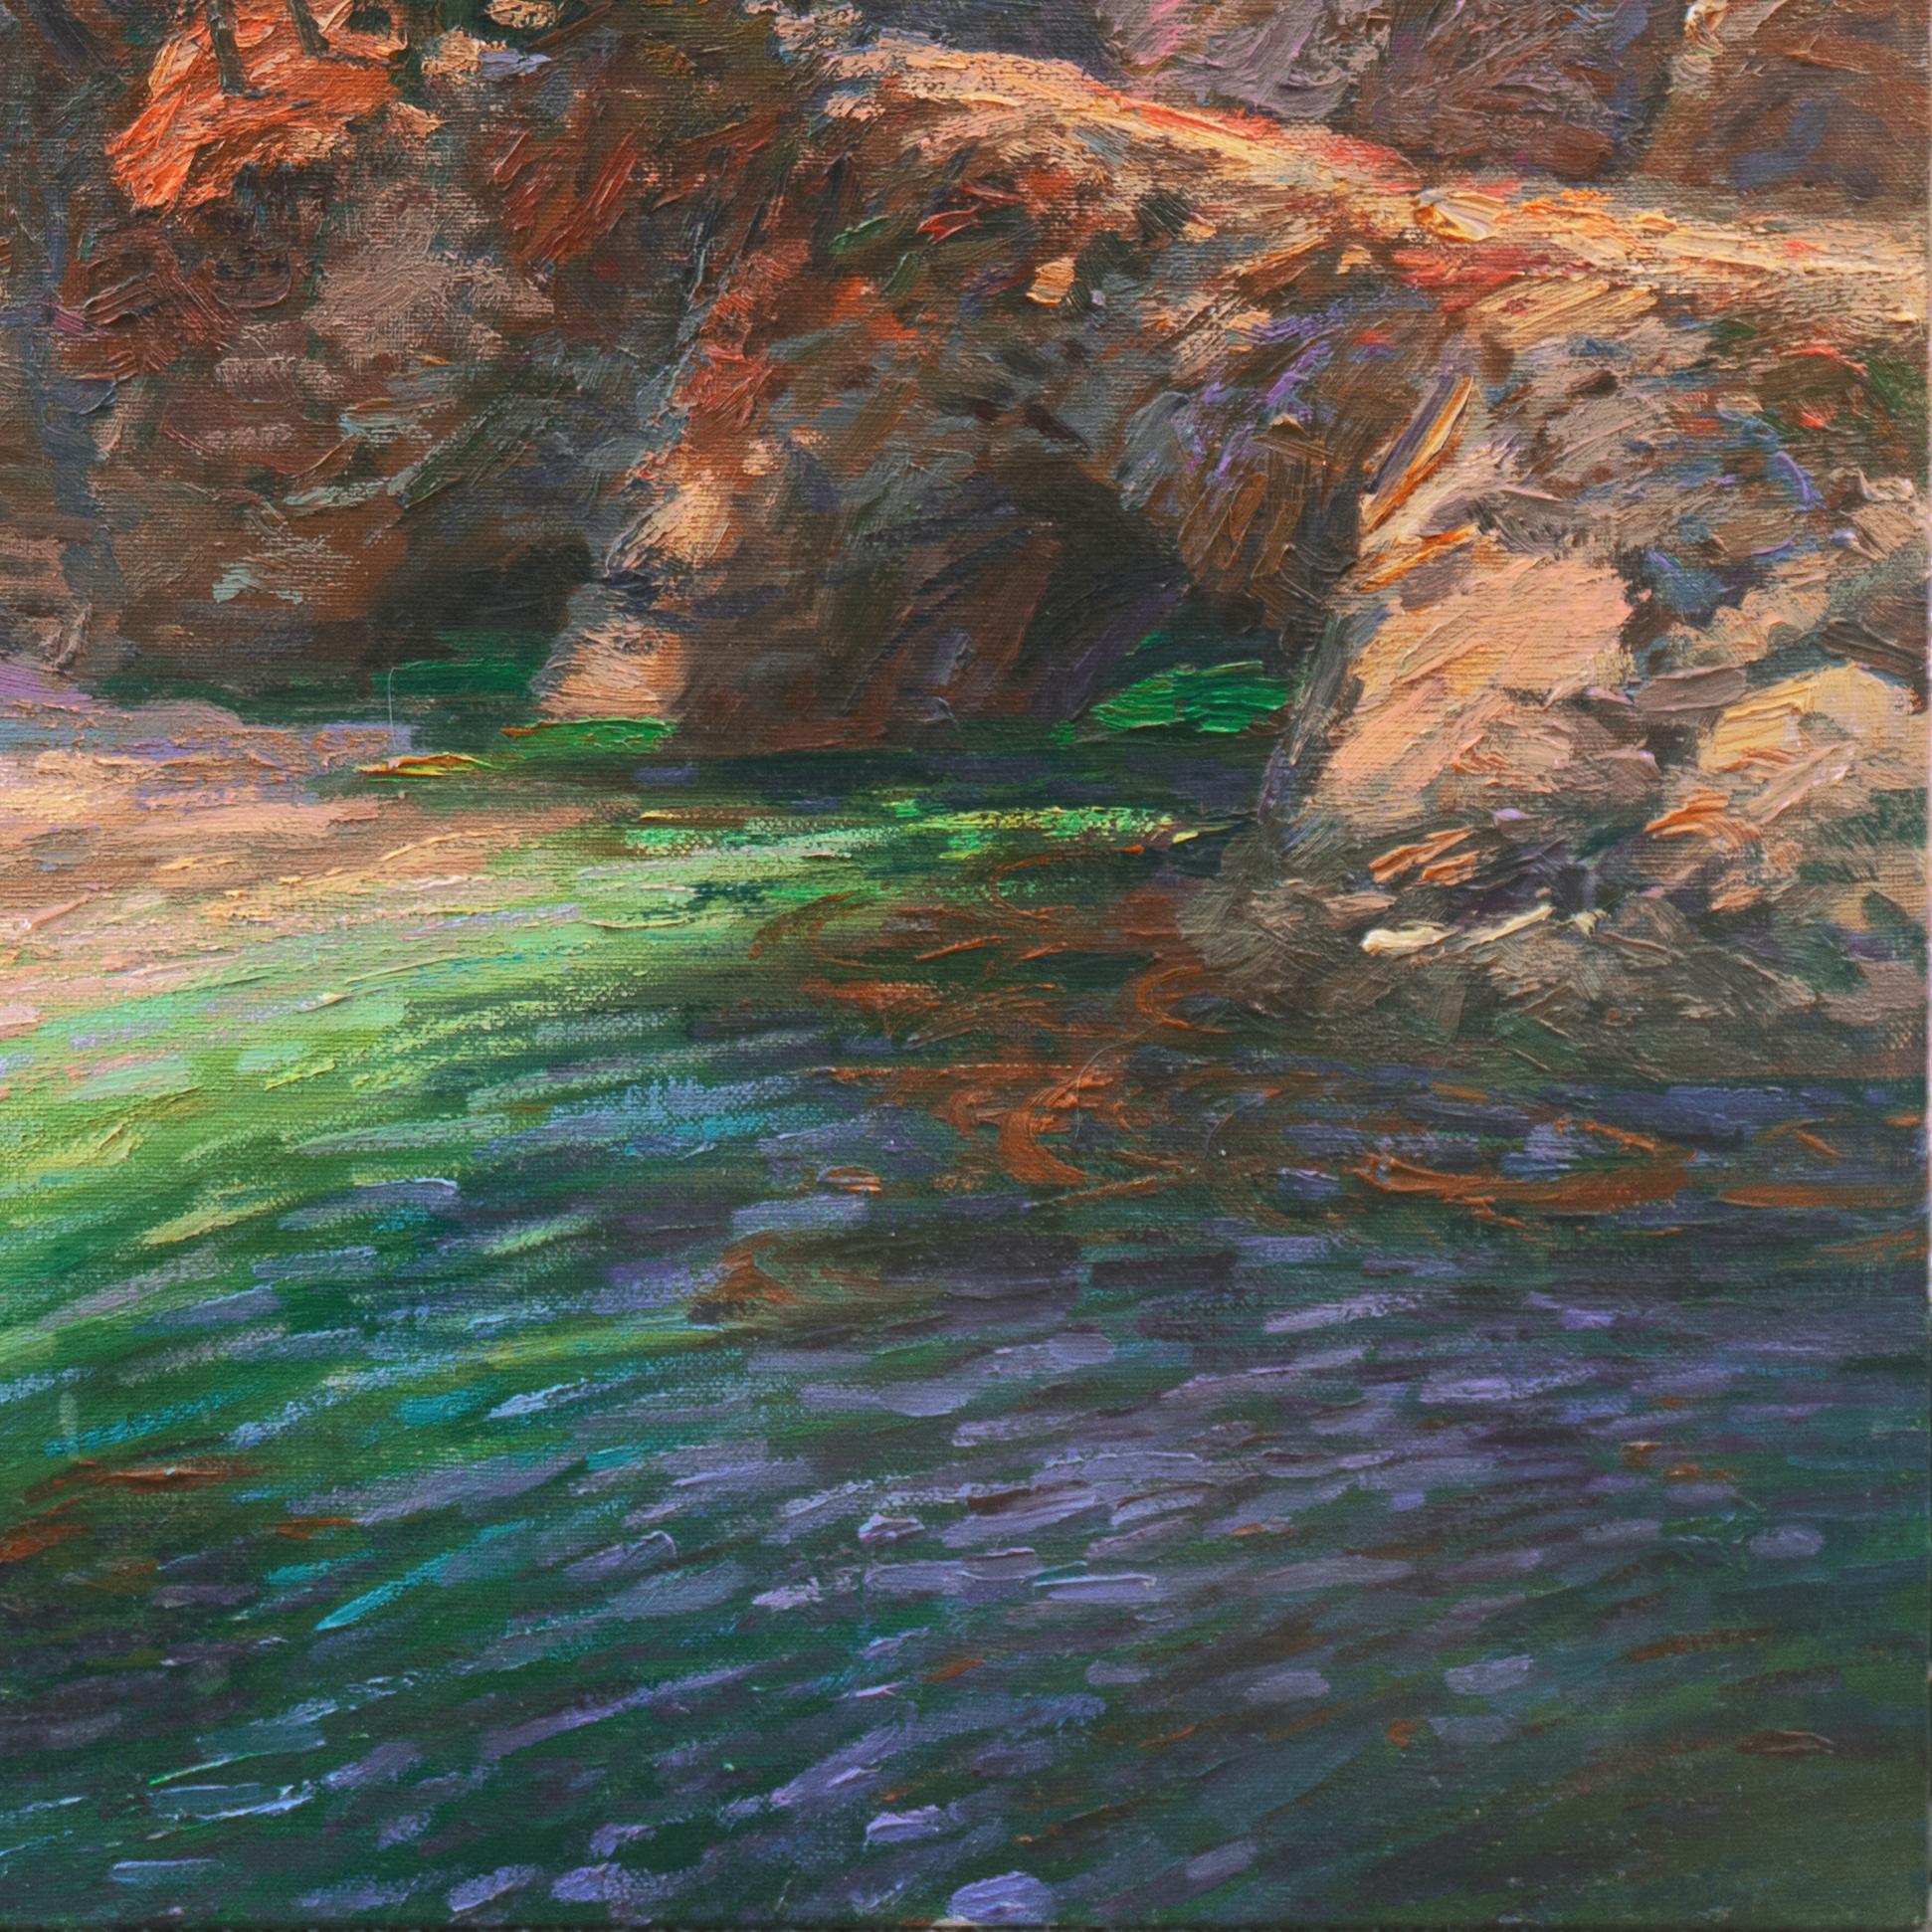 'Point Lobos, China Cove', Carmel, California Impressionist Oil, Monterey - Gray Landscape Painting by Edward Glafke